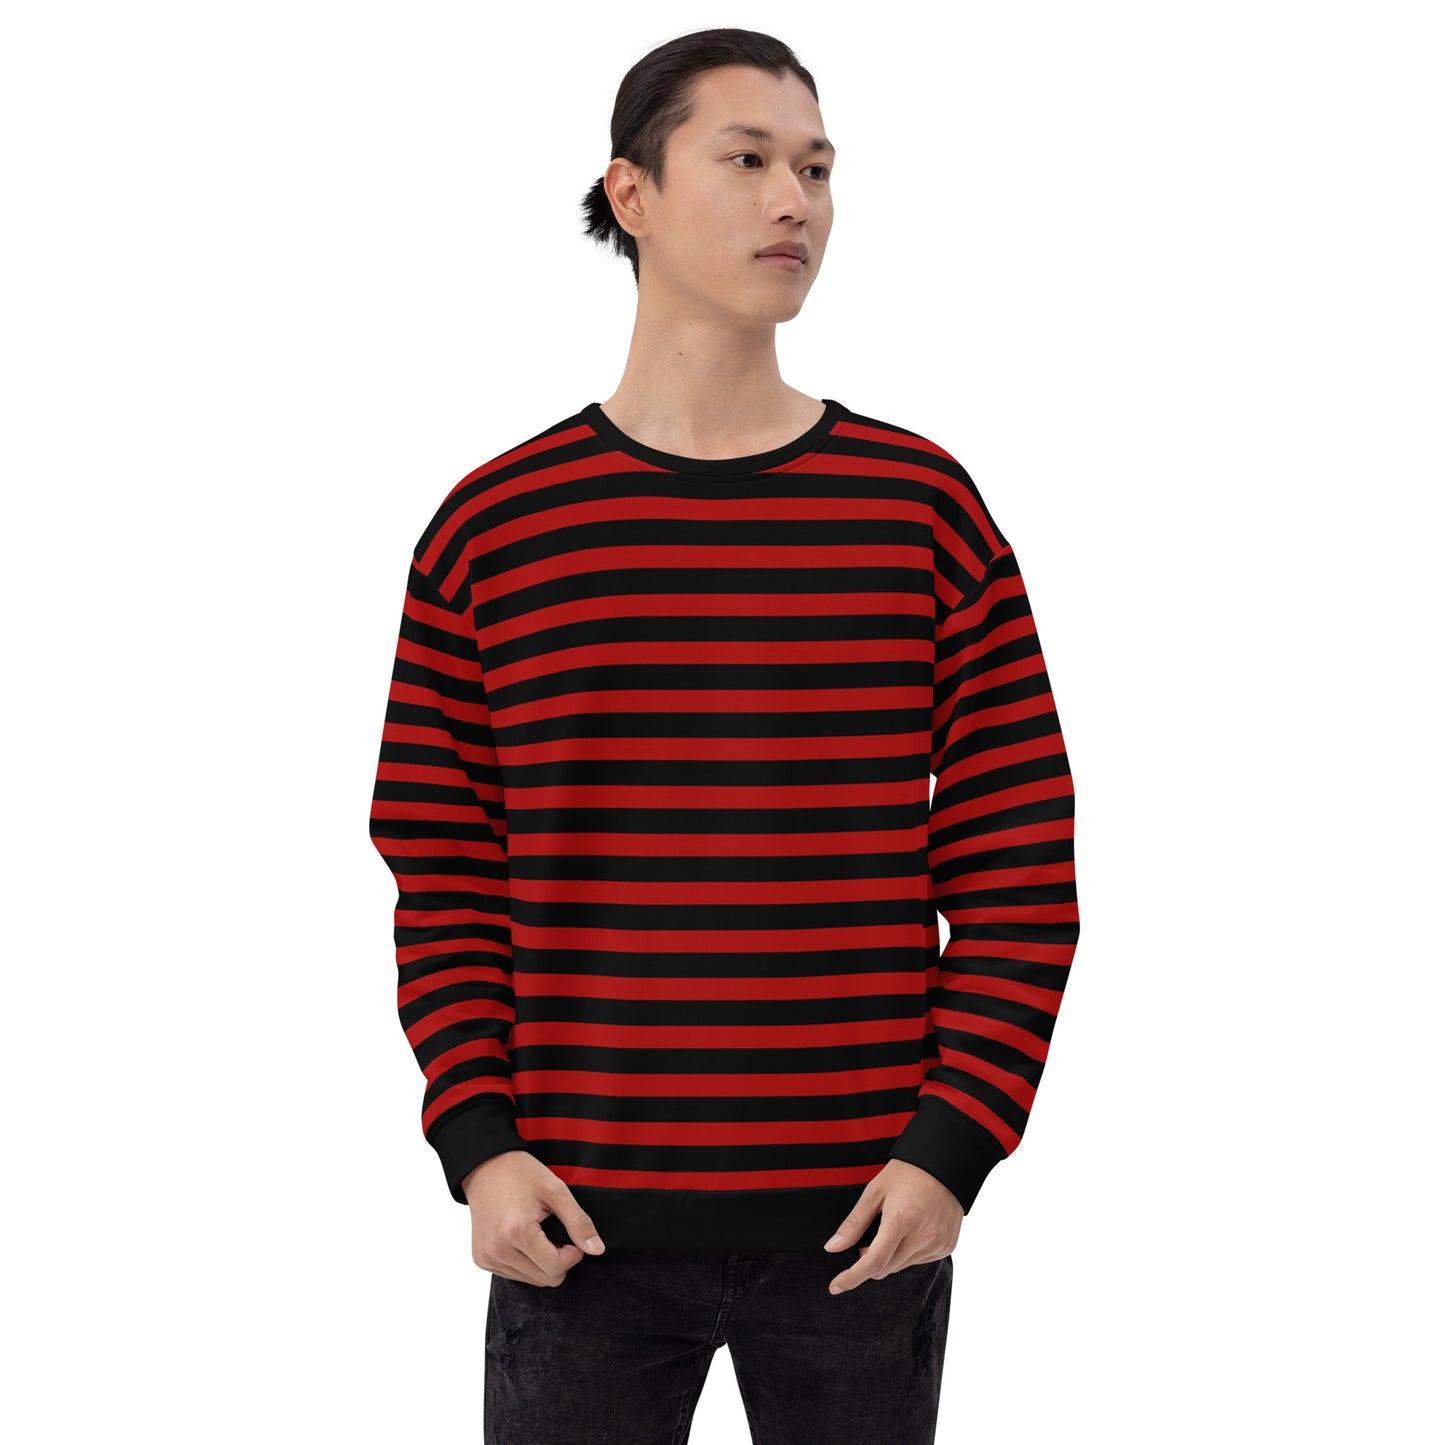 Black Red Striped Sweater / Eco Friendly / For Men And Women